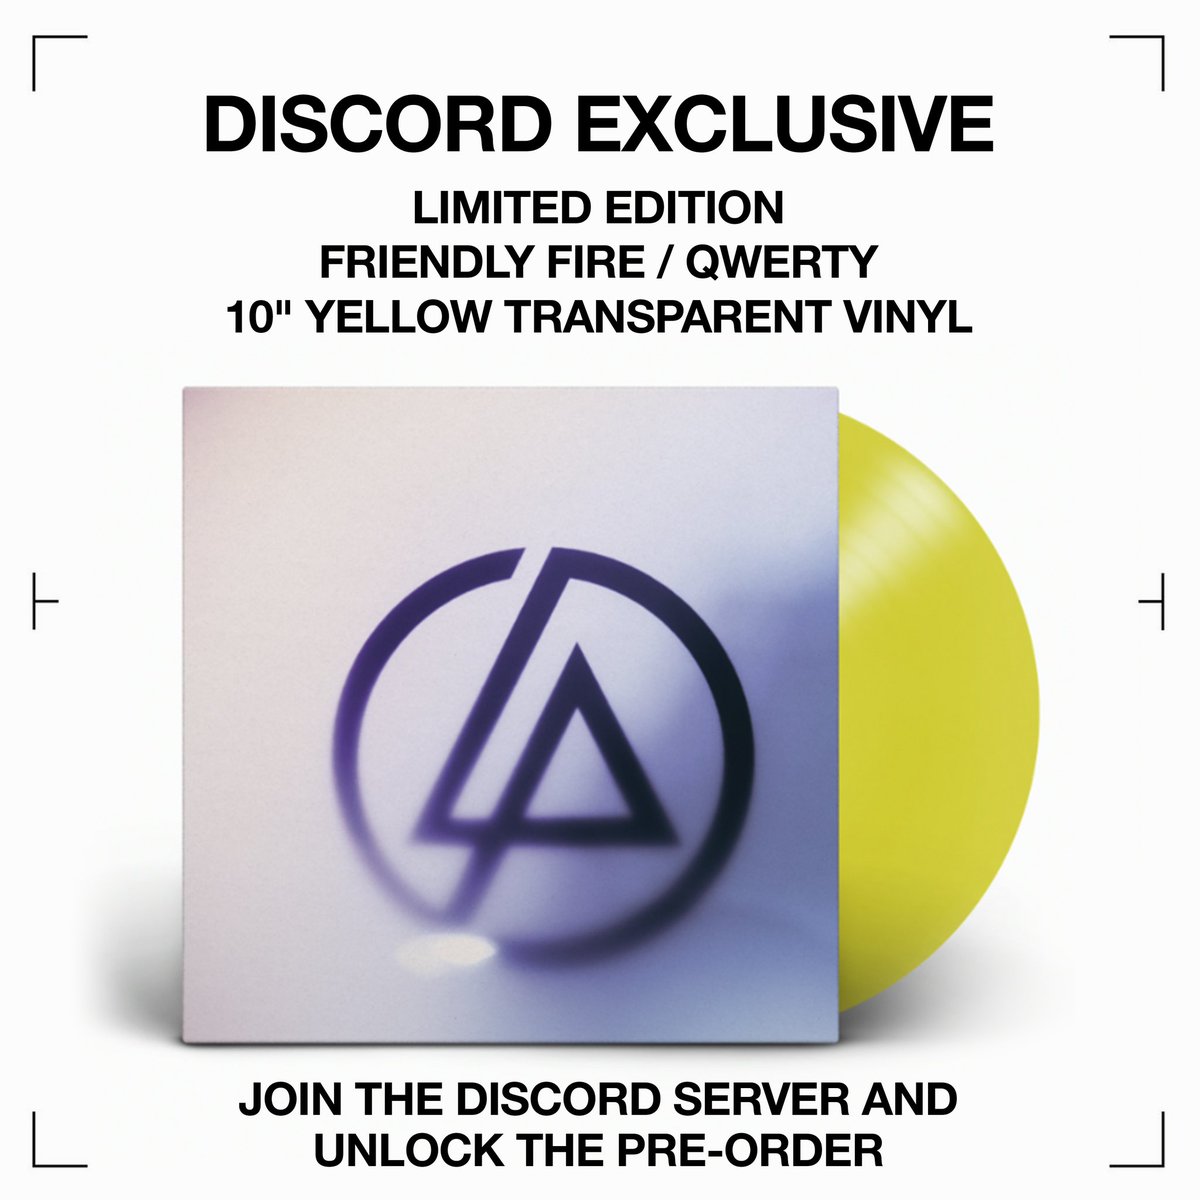 Head to our Discord Server to pre-order FRIENDLY FIRE / QWERTY 10” Yellow Transparent Vinyl (Out May 31st) - Limited to 2,000 copies. Look for the “discord-exclusives” channel to unlock - discord.gg/linkinpark